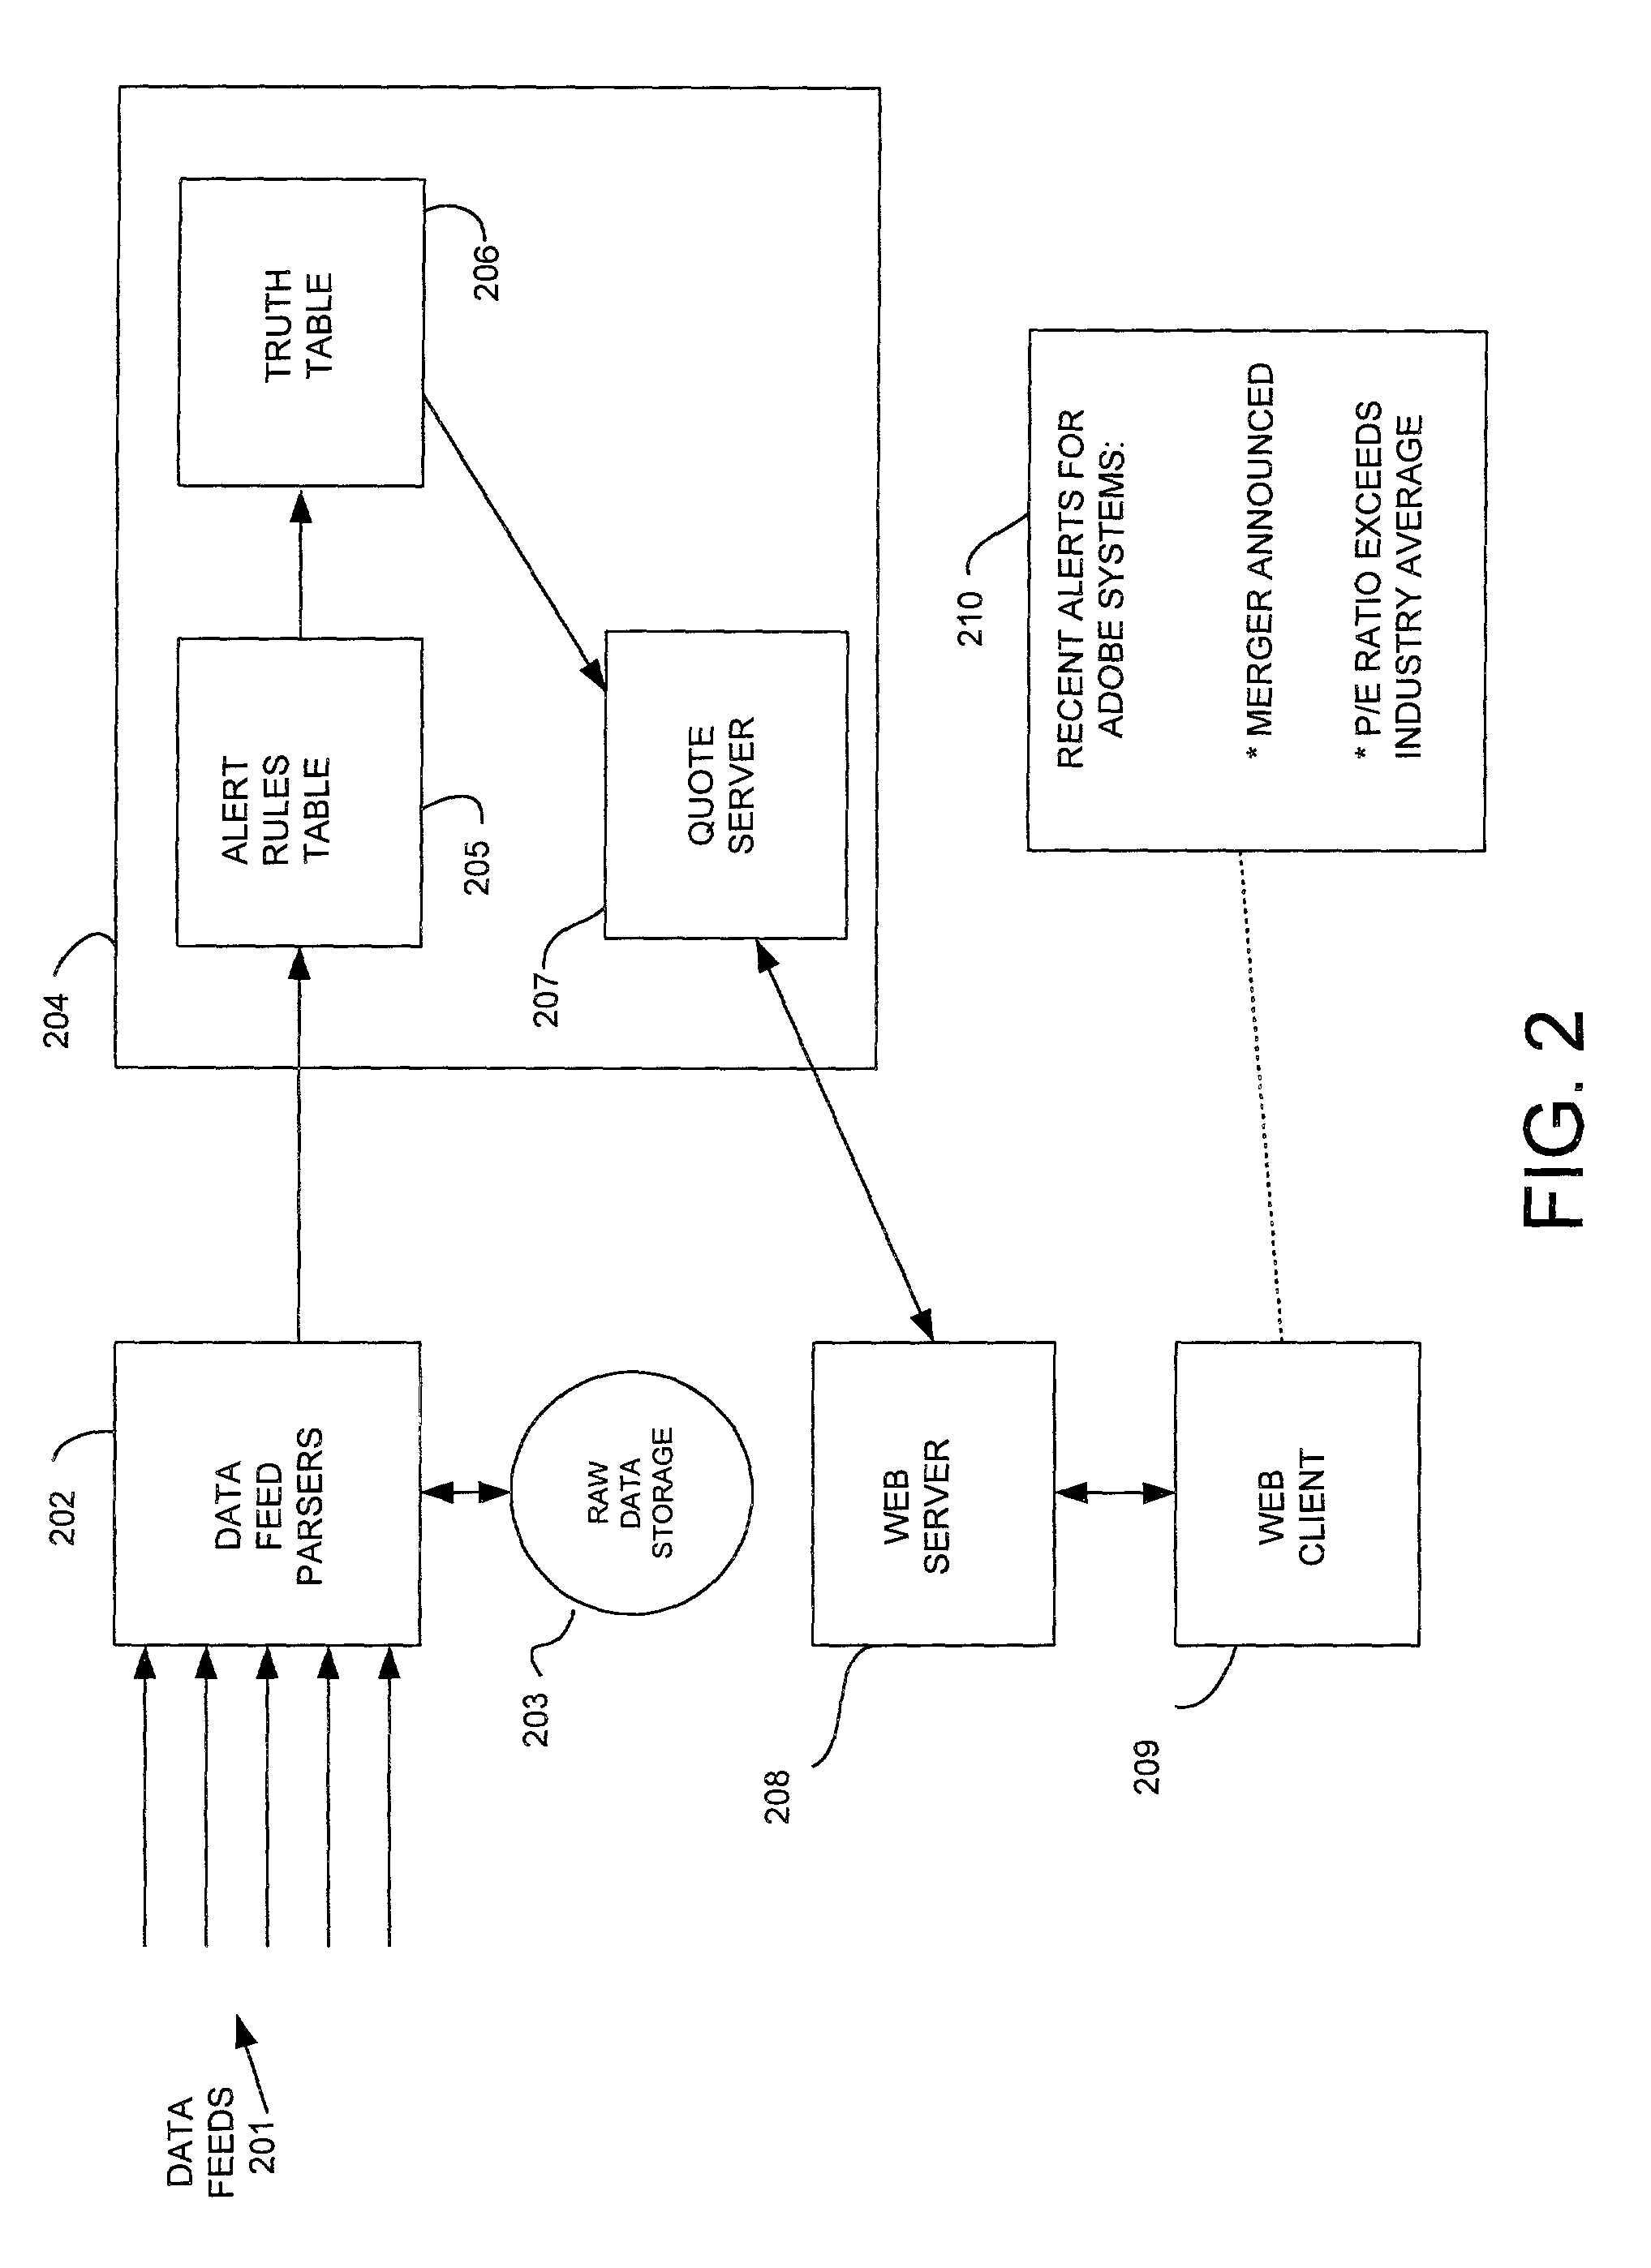 System and method for providing automated investment alerts from multiple data sources